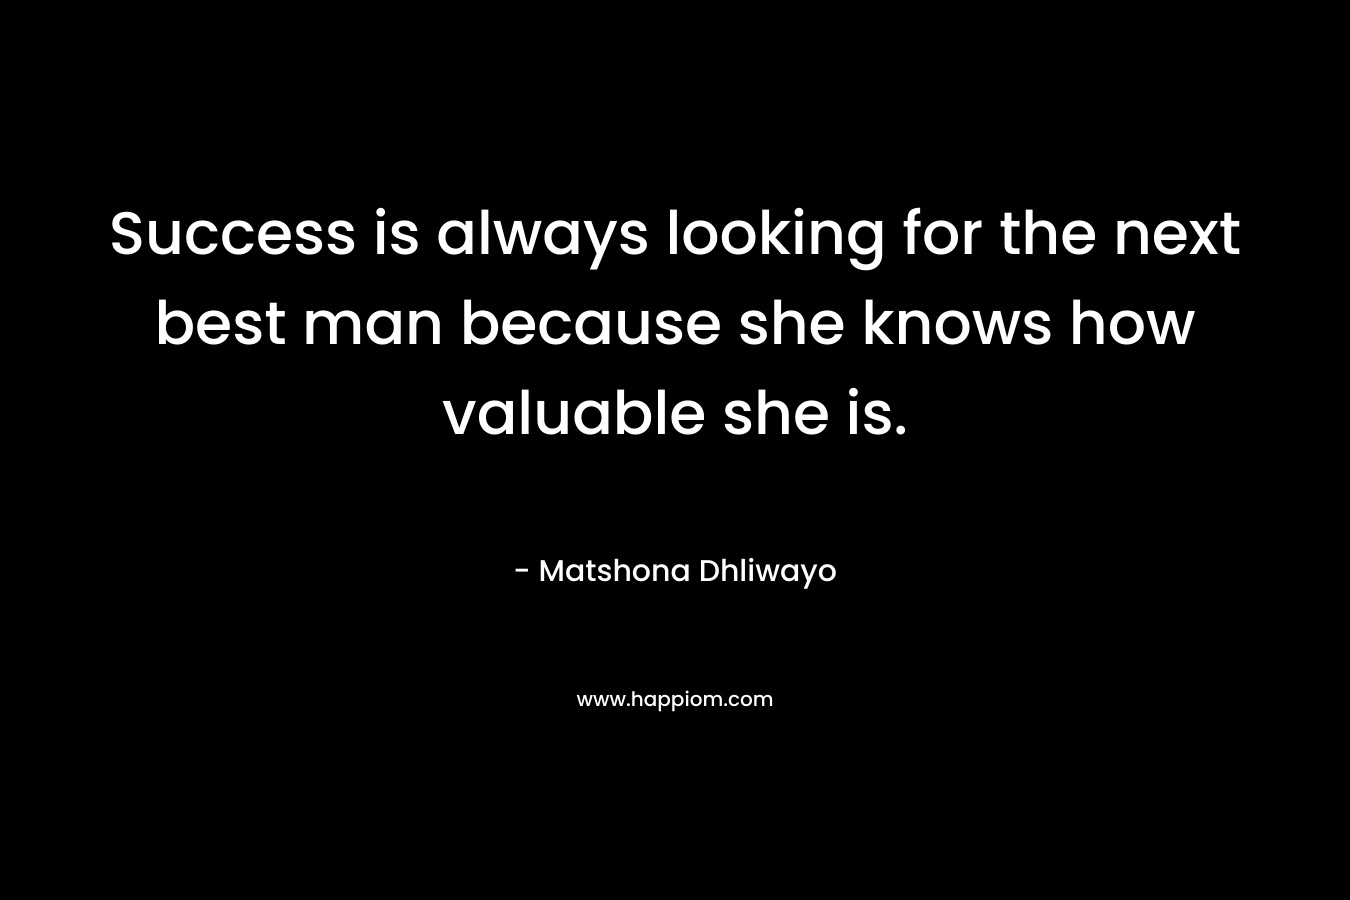 Success is always looking for the next best man because she knows how valuable she is.